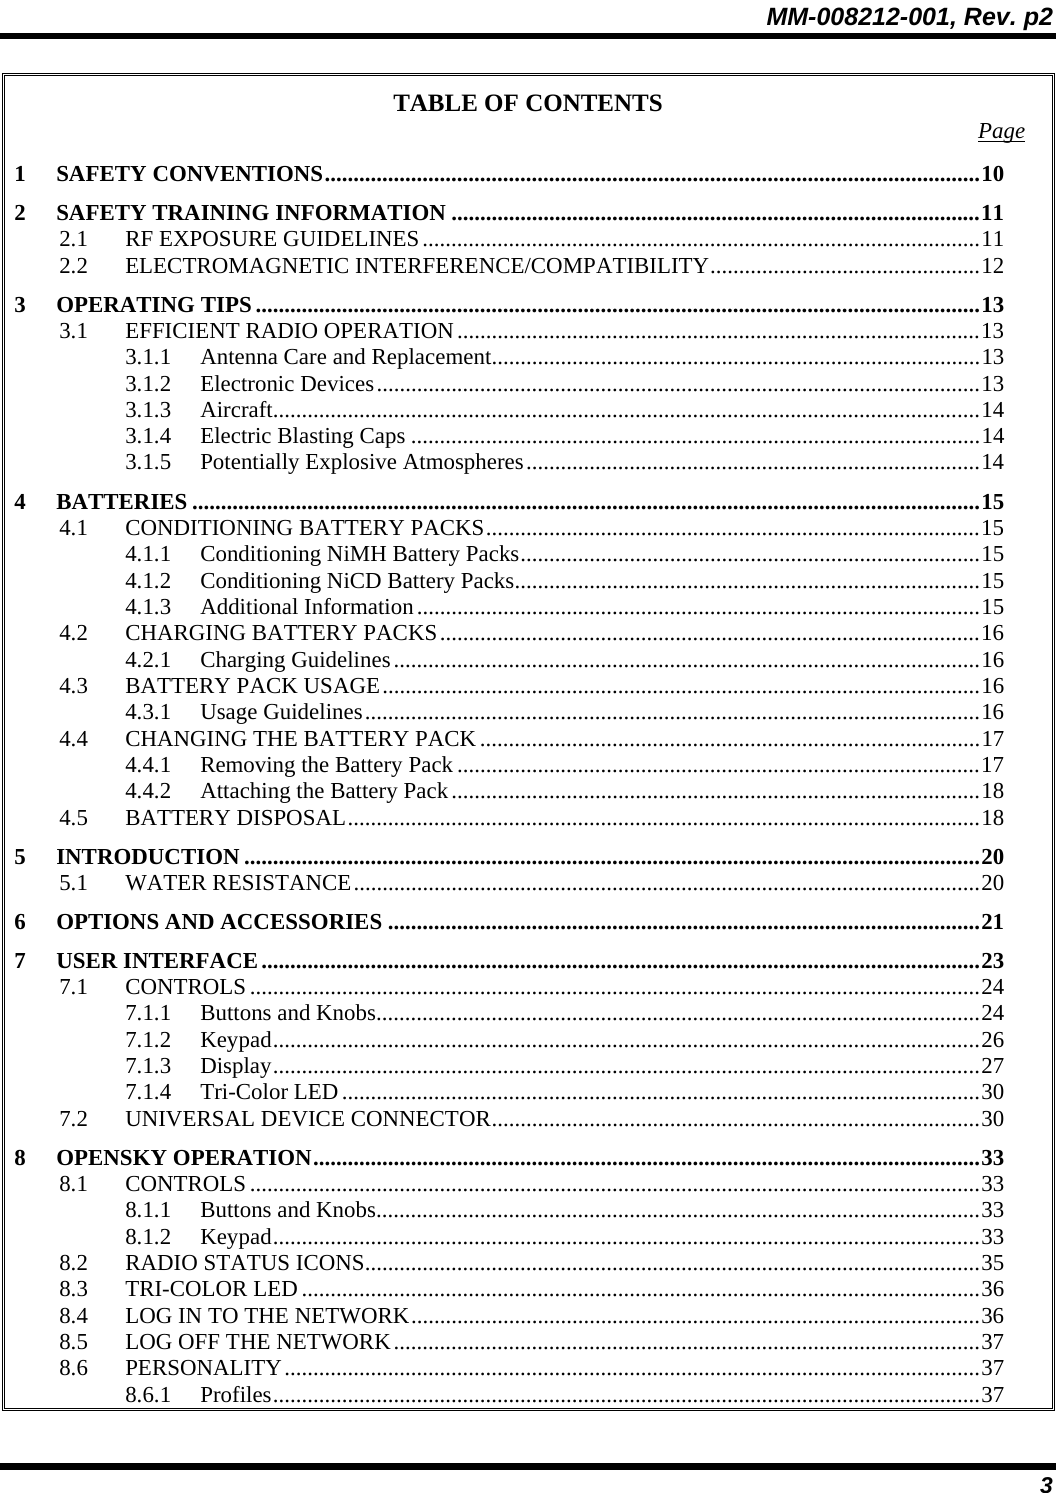 MM-008212-001, Rev. p2 3 TABLE OF CONTENTS  Page 1 SAFETY CONVENTIONS..................................................................................................................10 2 SAFETY TRAINING INFORMATION ............................................................................................11 2.1 RF EXPOSURE GUIDELINES.................................................................................................11 2.2 ELECTROMAGNETIC INTERFERENCE/COMPATIBILITY...............................................12 3 OPERATING TIPS ..............................................................................................................................13 3.1 EFFICIENT RADIO OPERATION...........................................................................................13 3.1.1 Antenna Care and Replacement.....................................................................................13 3.1.2 Electronic Devices.........................................................................................................13 3.1.3 Aircraft...........................................................................................................................14 3.1.4 Electric Blasting Caps ...................................................................................................14 3.1.5 Potentially Explosive Atmospheres...............................................................................14 4 BATTERIES .........................................................................................................................................15 4.1 CONDITIONING BATTERY PACKS......................................................................................15 4.1.1 Conditioning NiMH Battery Packs................................................................................15 4.1.2 Conditioning NiCD Battery Packs.................................................................................15 4.1.3 Additional Information..................................................................................................15 4.2 CHARGING BATTERY PACKS..............................................................................................16 4.2.1 Charging Guidelines......................................................................................................16 4.3 BATTERY PACK USAGE........................................................................................................16 4.3.1 Usage Guidelines...........................................................................................................16 4.4 CHANGING THE BATTERY PACK .......................................................................................17 4.4.1 Removing the Battery Pack ...........................................................................................17 4.4.2 Attaching the Battery Pack............................................................................................18 4.5 BATTERY DISPOSAL..............................................................................................................18 5 INTRODUCTION ................................................................................................................................20 5.1 WATER RESISTANCE.............................................................................................................20 6 OPTIONS AND ACCESSORIES .......................................................................................................21 7 USER INTERFACE.............................................................................................................................23 7.1 CONTROLS...............................................................................................................................24 7.1.1 Buttons and Knobs.........................................................................................................24 7.1.2 Keypad...........................................................................................................................26 7.1.3 Display...........................................................................................................................27 7.1.4 Tri-Color LED...............................................................................................................30 7.2 UNIVERSAL DEVICE CONNECTOR.....................................................................................30 8 OPENSKY OPERATION....................................................................................................................33 8.1 CONTROLS...............................................................................................................................33 8.1.1 Buttons and Knobs.........................................................................................................33 8.1.2 Keypad...........................................................................................................................33 8.2 RADIO STATUS ICONS...........................................................................................................35 8.3 TRI-COLOR LED......................................................................................................................36 8.4 LOG IN TO THE NETWORK...................................................................................................36 8.5 LOG OFF THE NETWORK......................................................................................................37 8.6 PERSONALITY.........................................................................................................................37 8.6.1 Profiles...........................................................................................................................37 